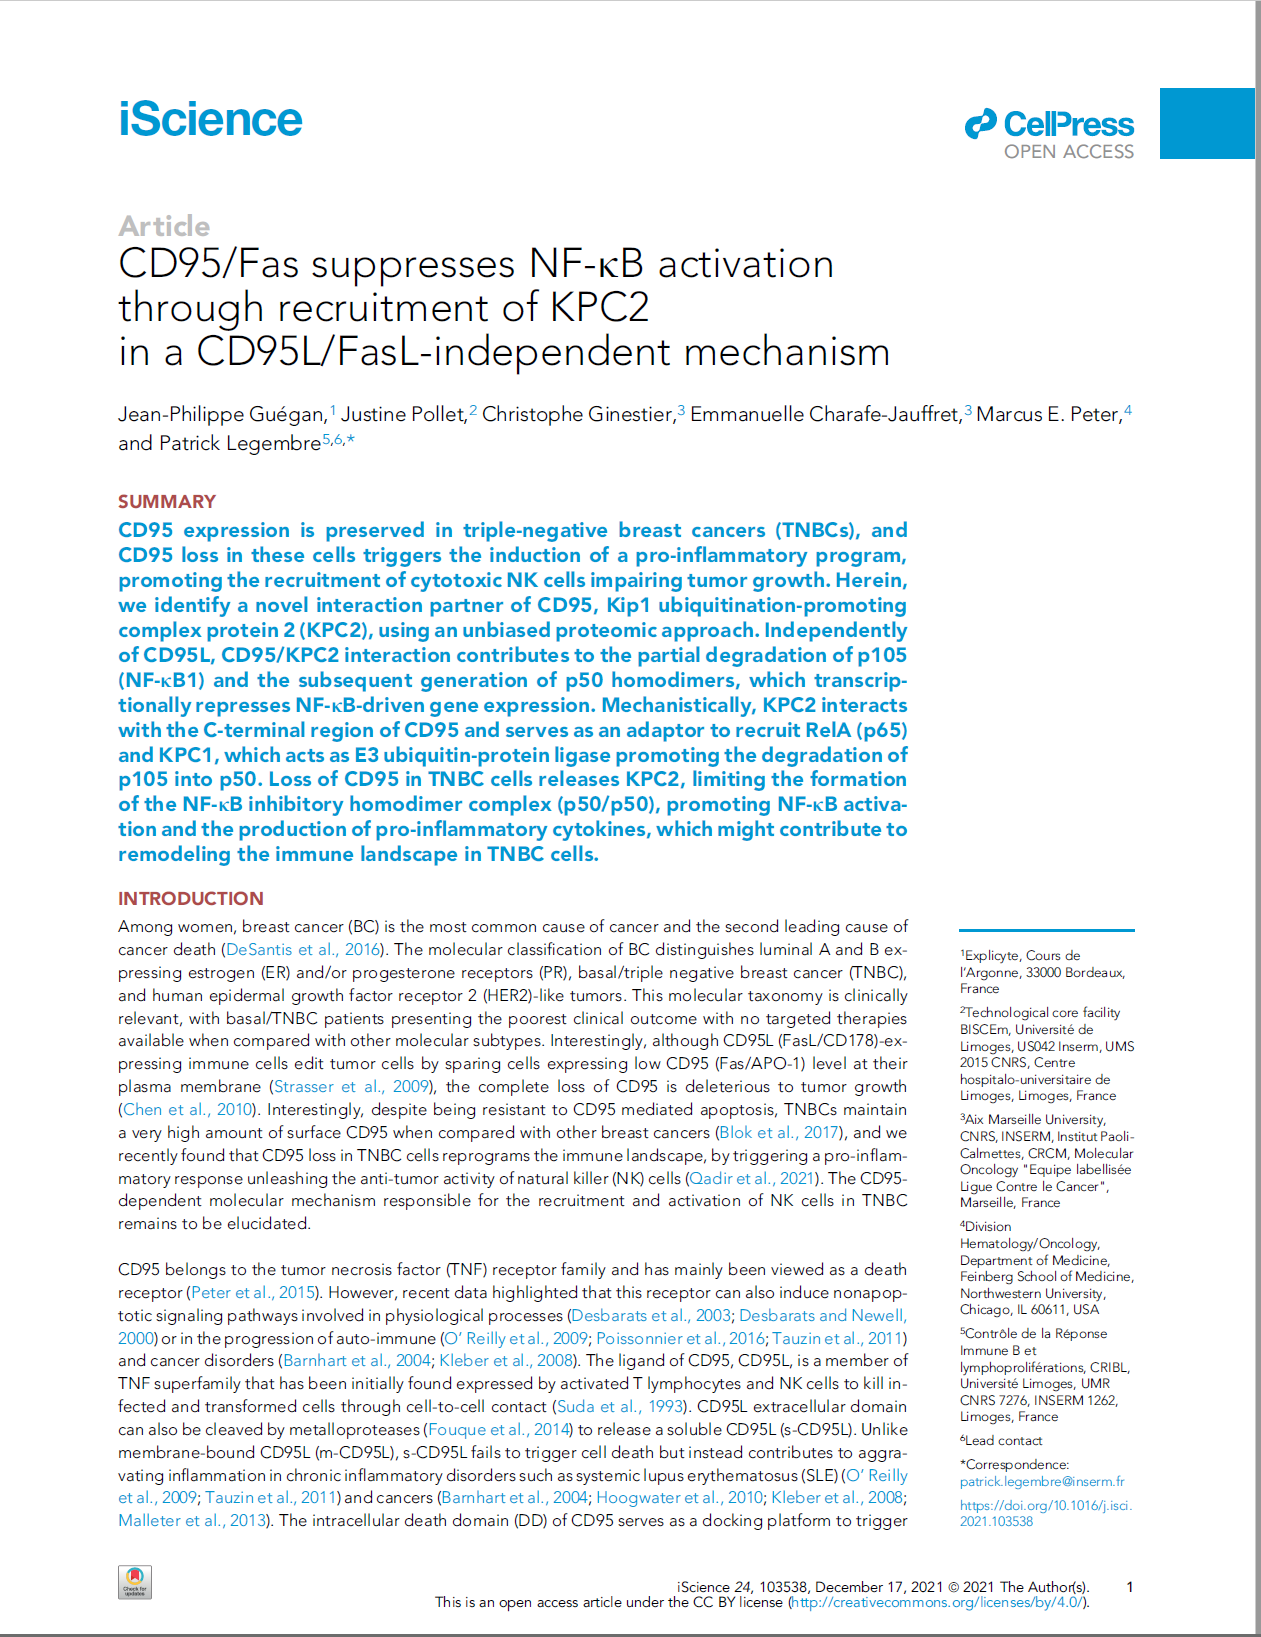 CD95/Fas suppresses NF-kB activation through recruitment of KPC2 in a CD95L/FasL-independent mechanism